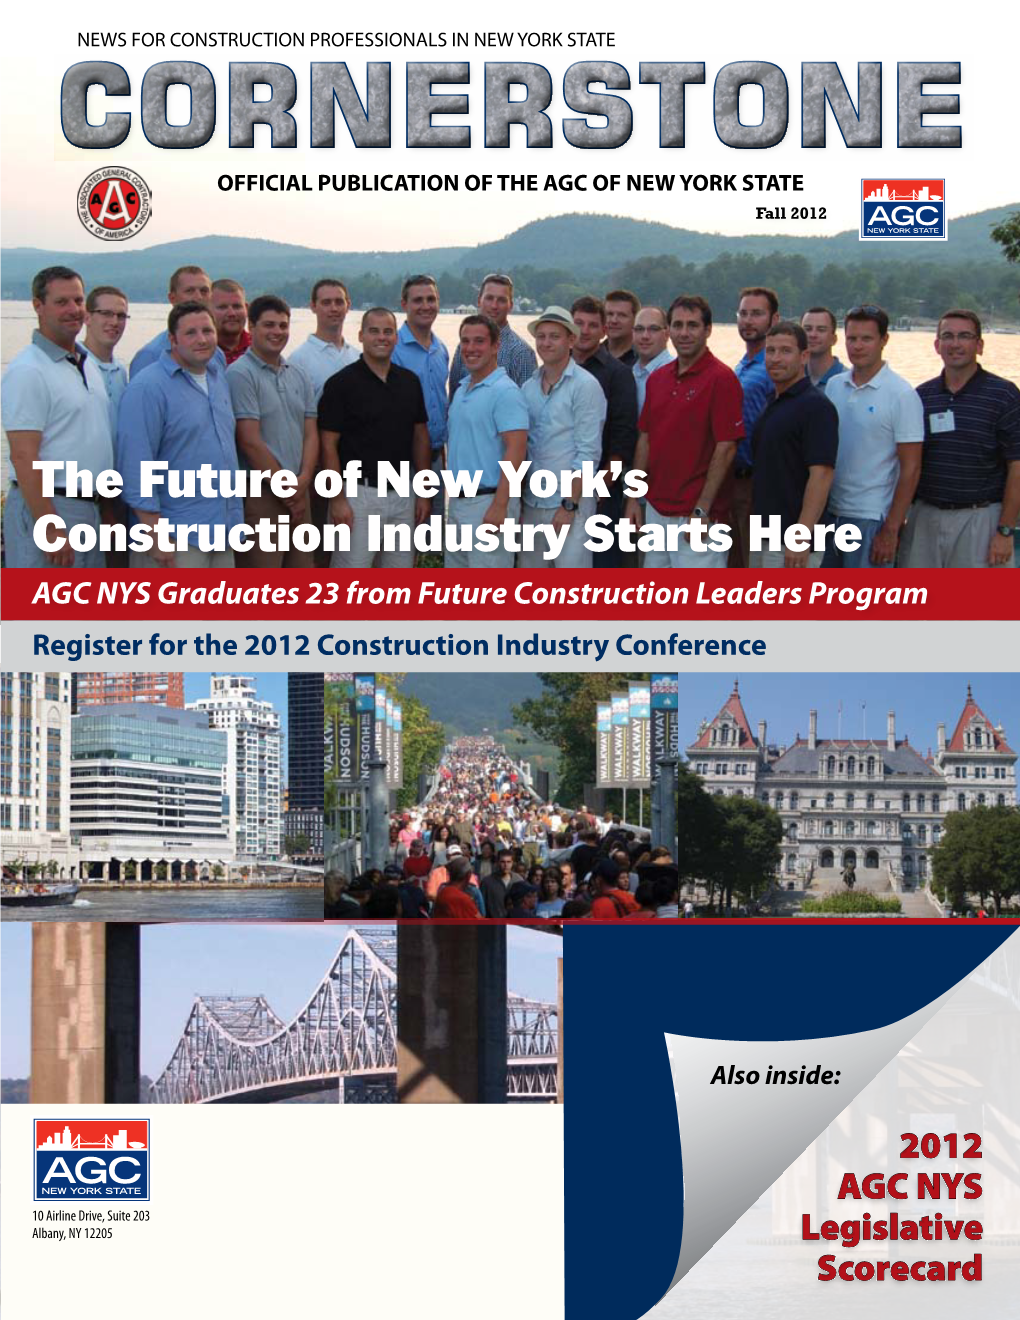 The Future of New York's Construction Industry Starts Here